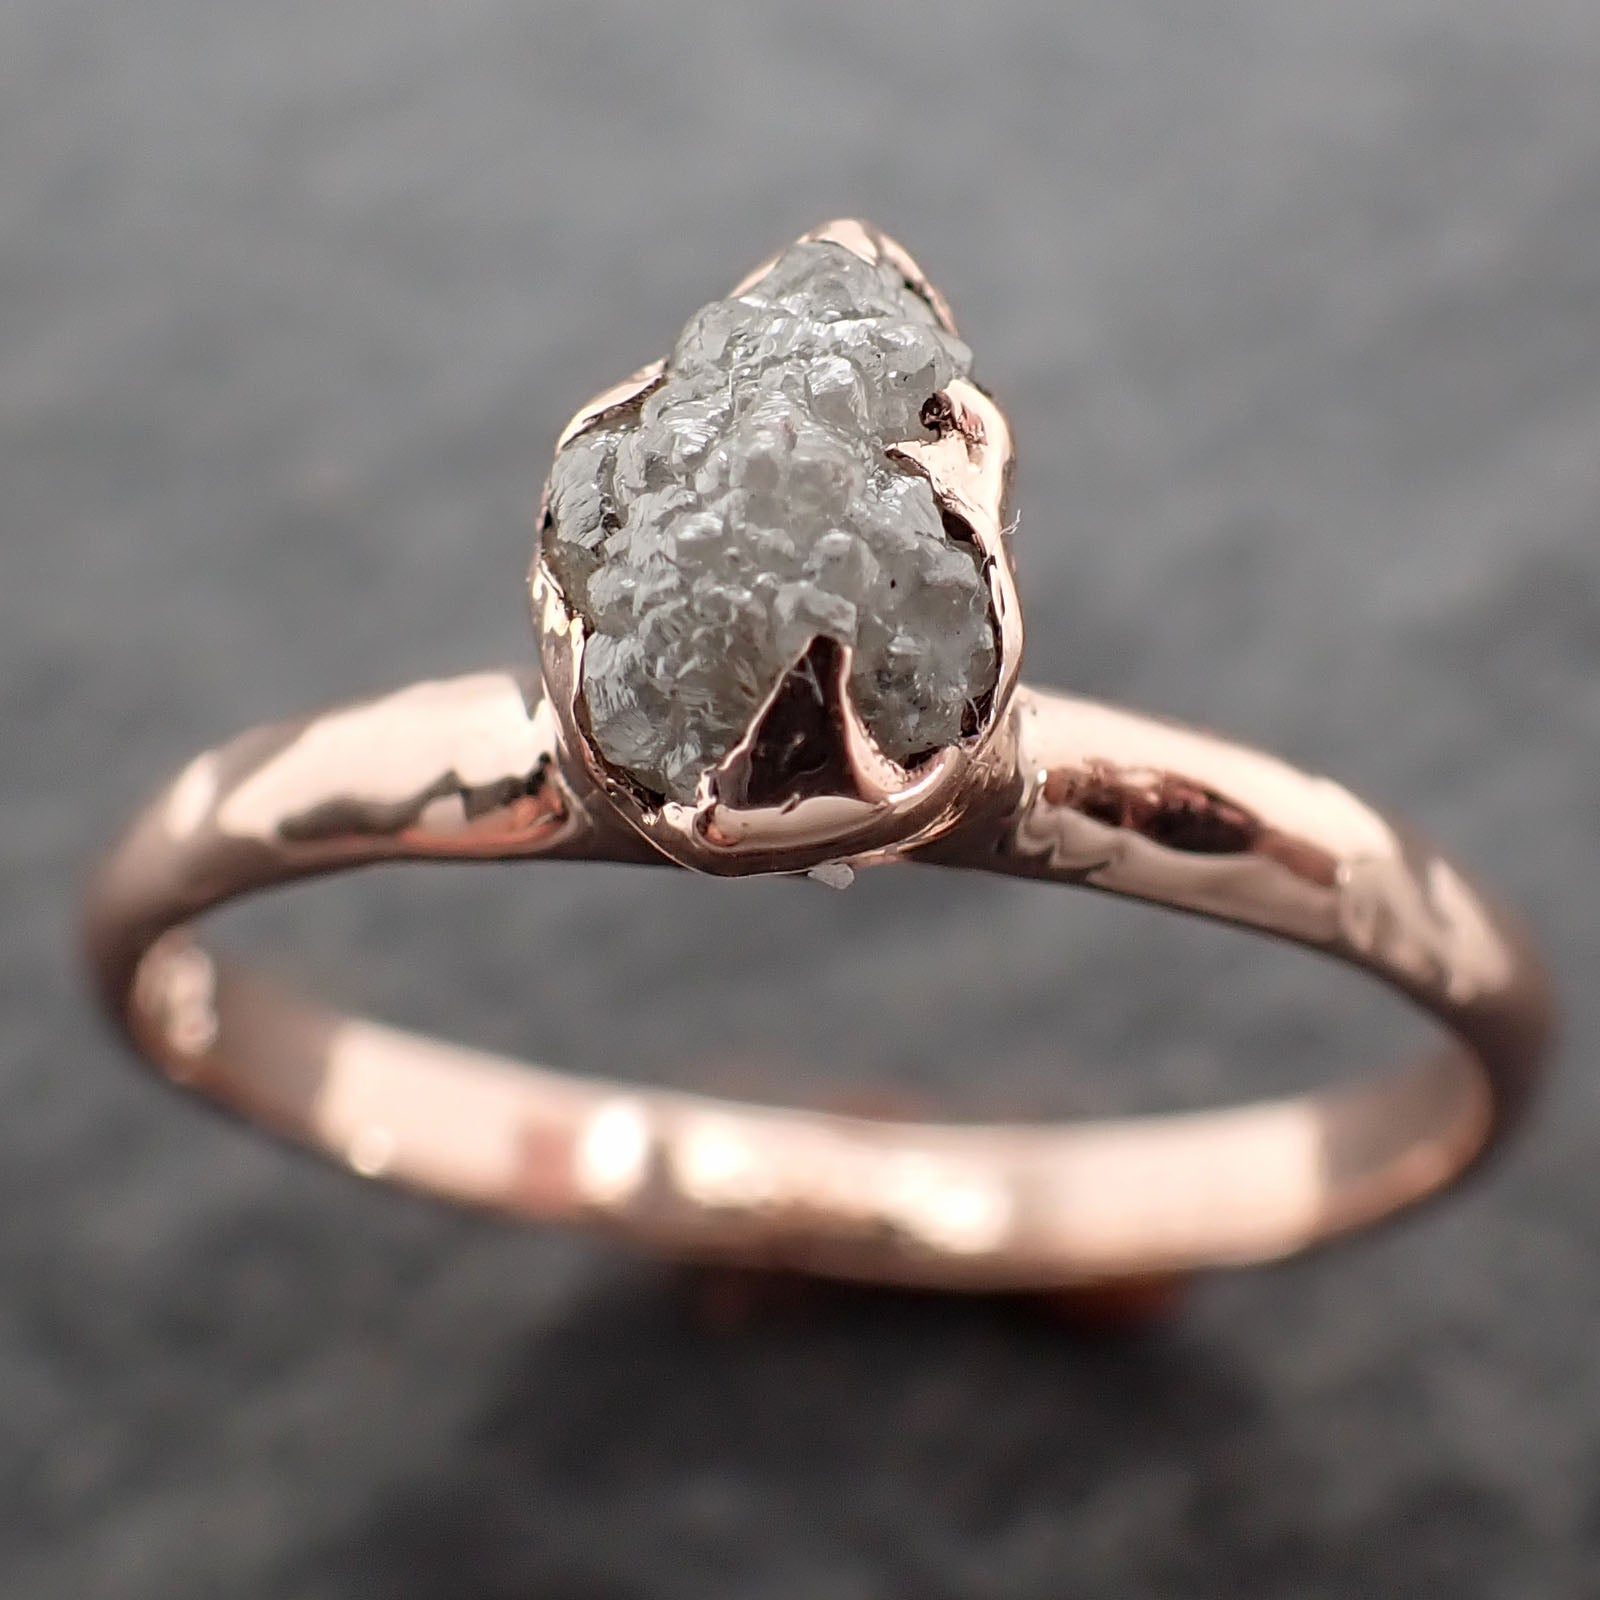 Raw Rough UnCut Diamond Engagement Ring Rough Diamond Solitaire Recycled 14k Rose gold Conflict Free Diamond Wedding Promise byAngeline 2704